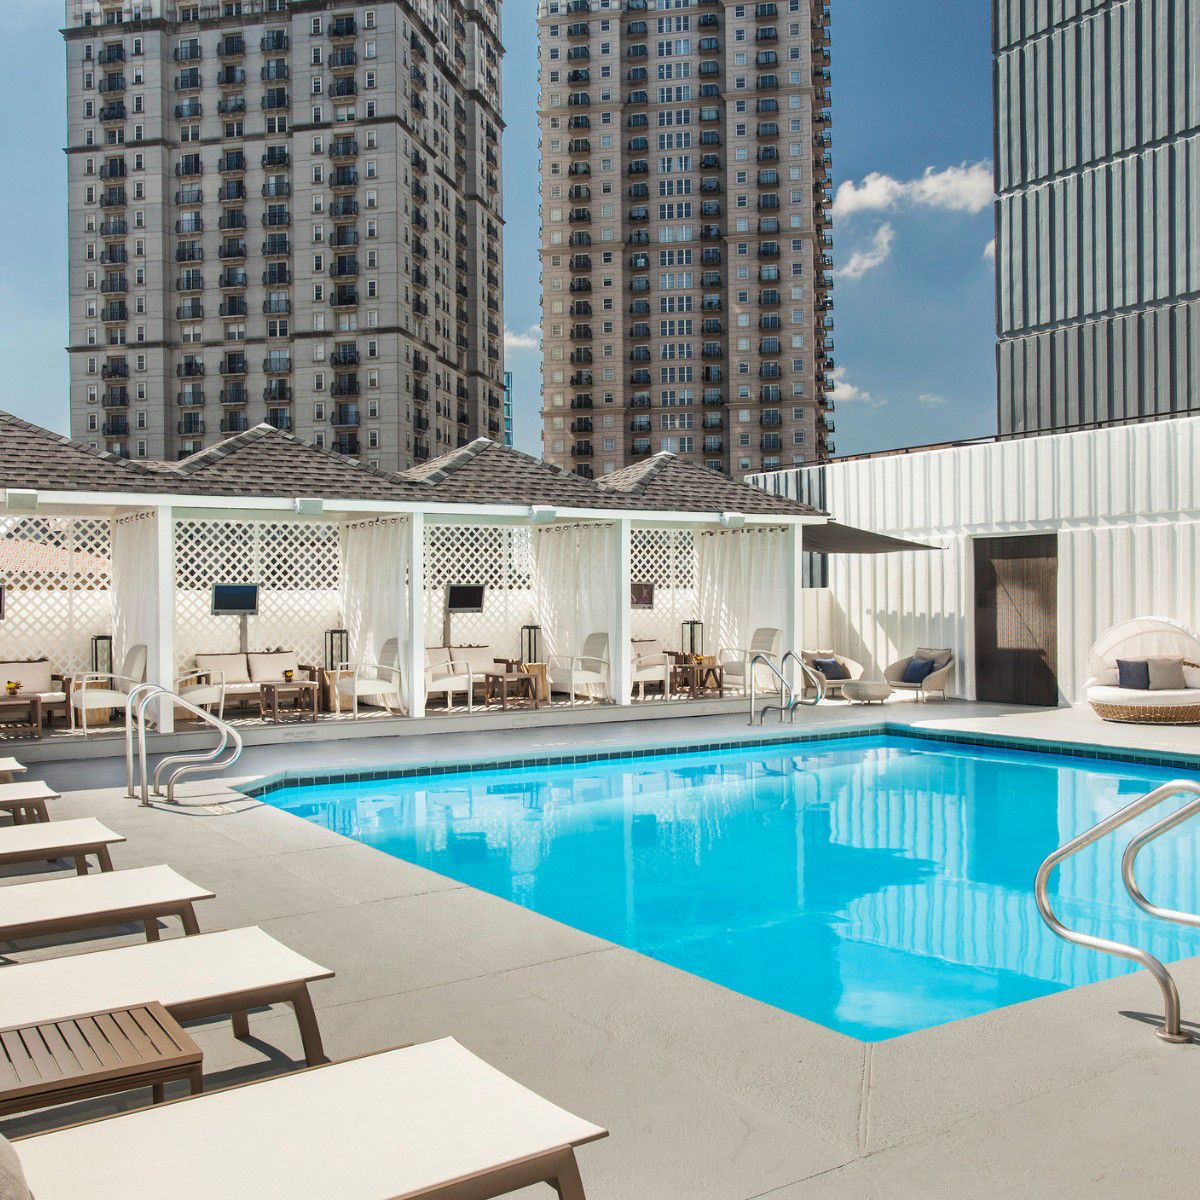 The outdoor pool on the terrace level of the The Starling hotel in midtown Atlanta.